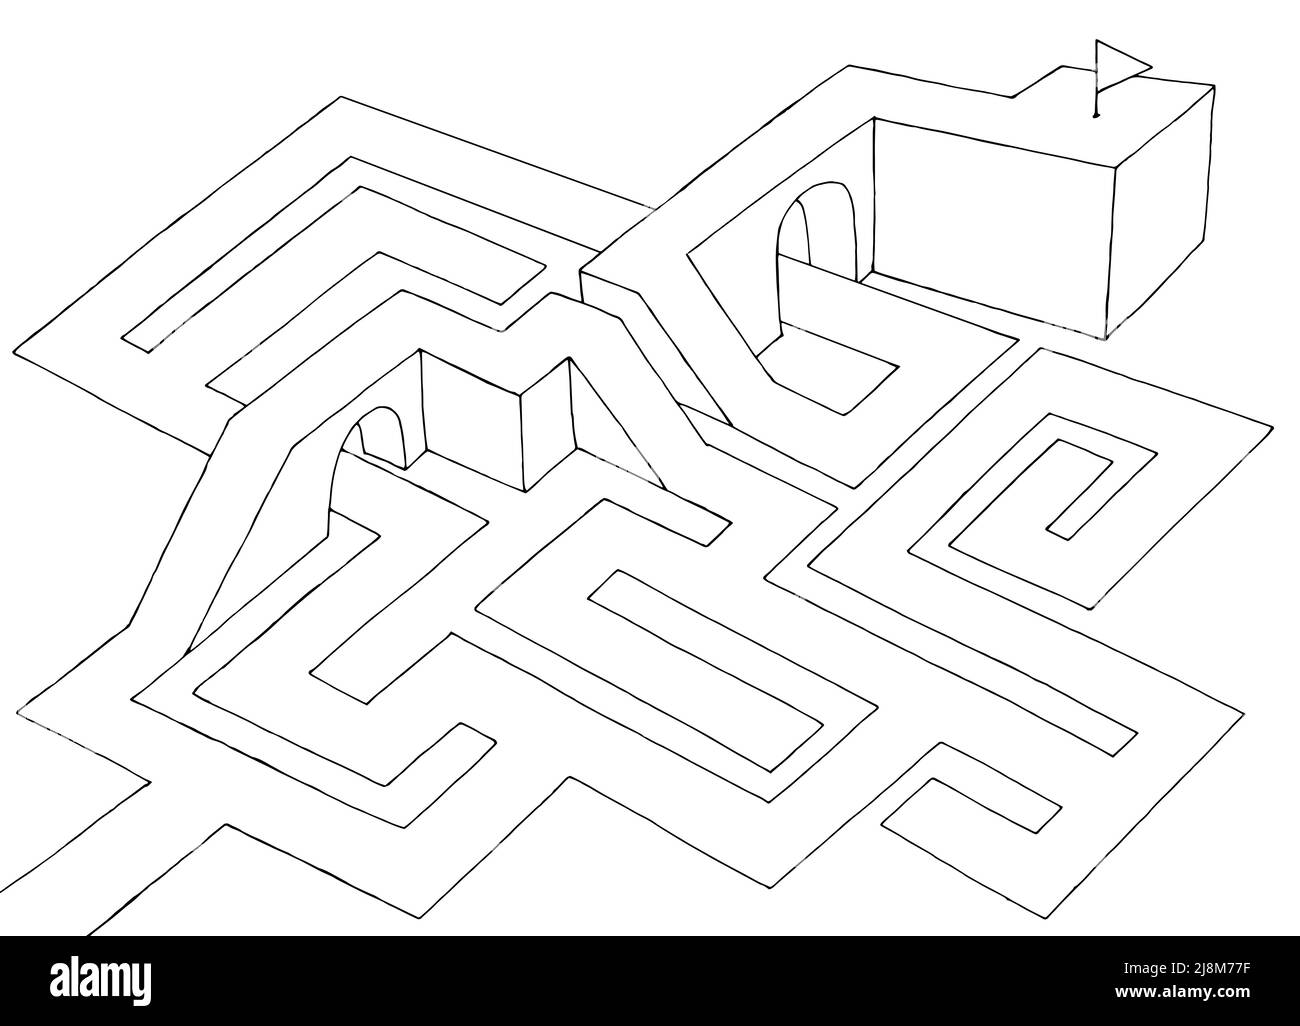 Maze graphic black white sketch top aerial view illustration vector Stock Vector